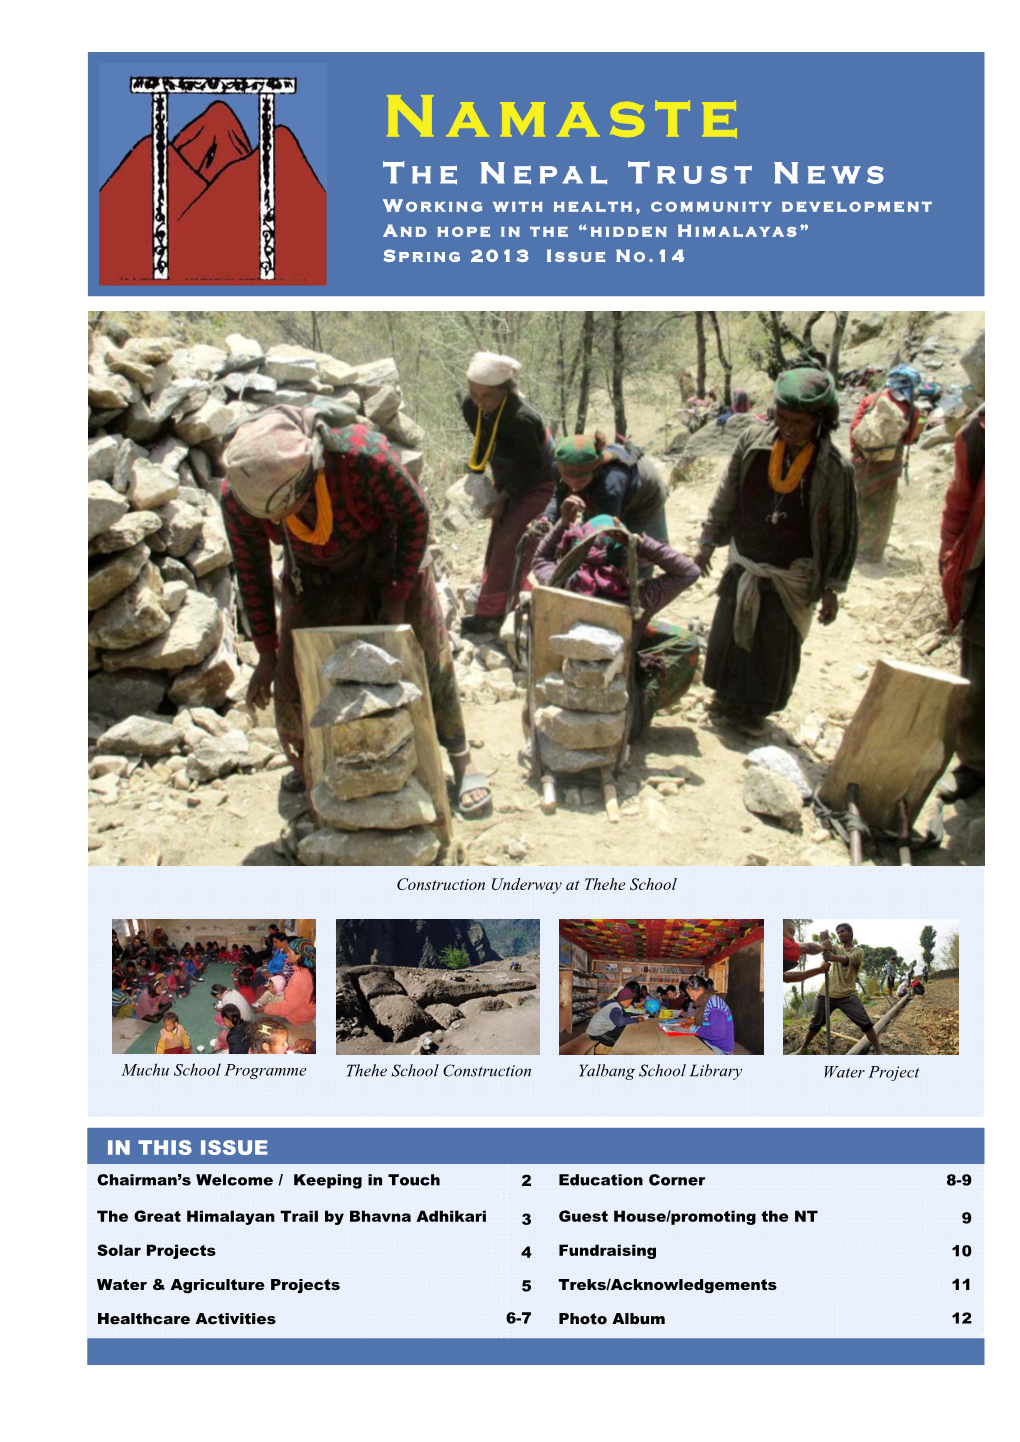 Namaste the NEPAL TRUST NEWS W ORKING with HEALTH, COMMUNITY DEVELOPMENT and HOPE in the “HIDDEN HIMALAYAS” SPRING 2013 ISSUE NO .14